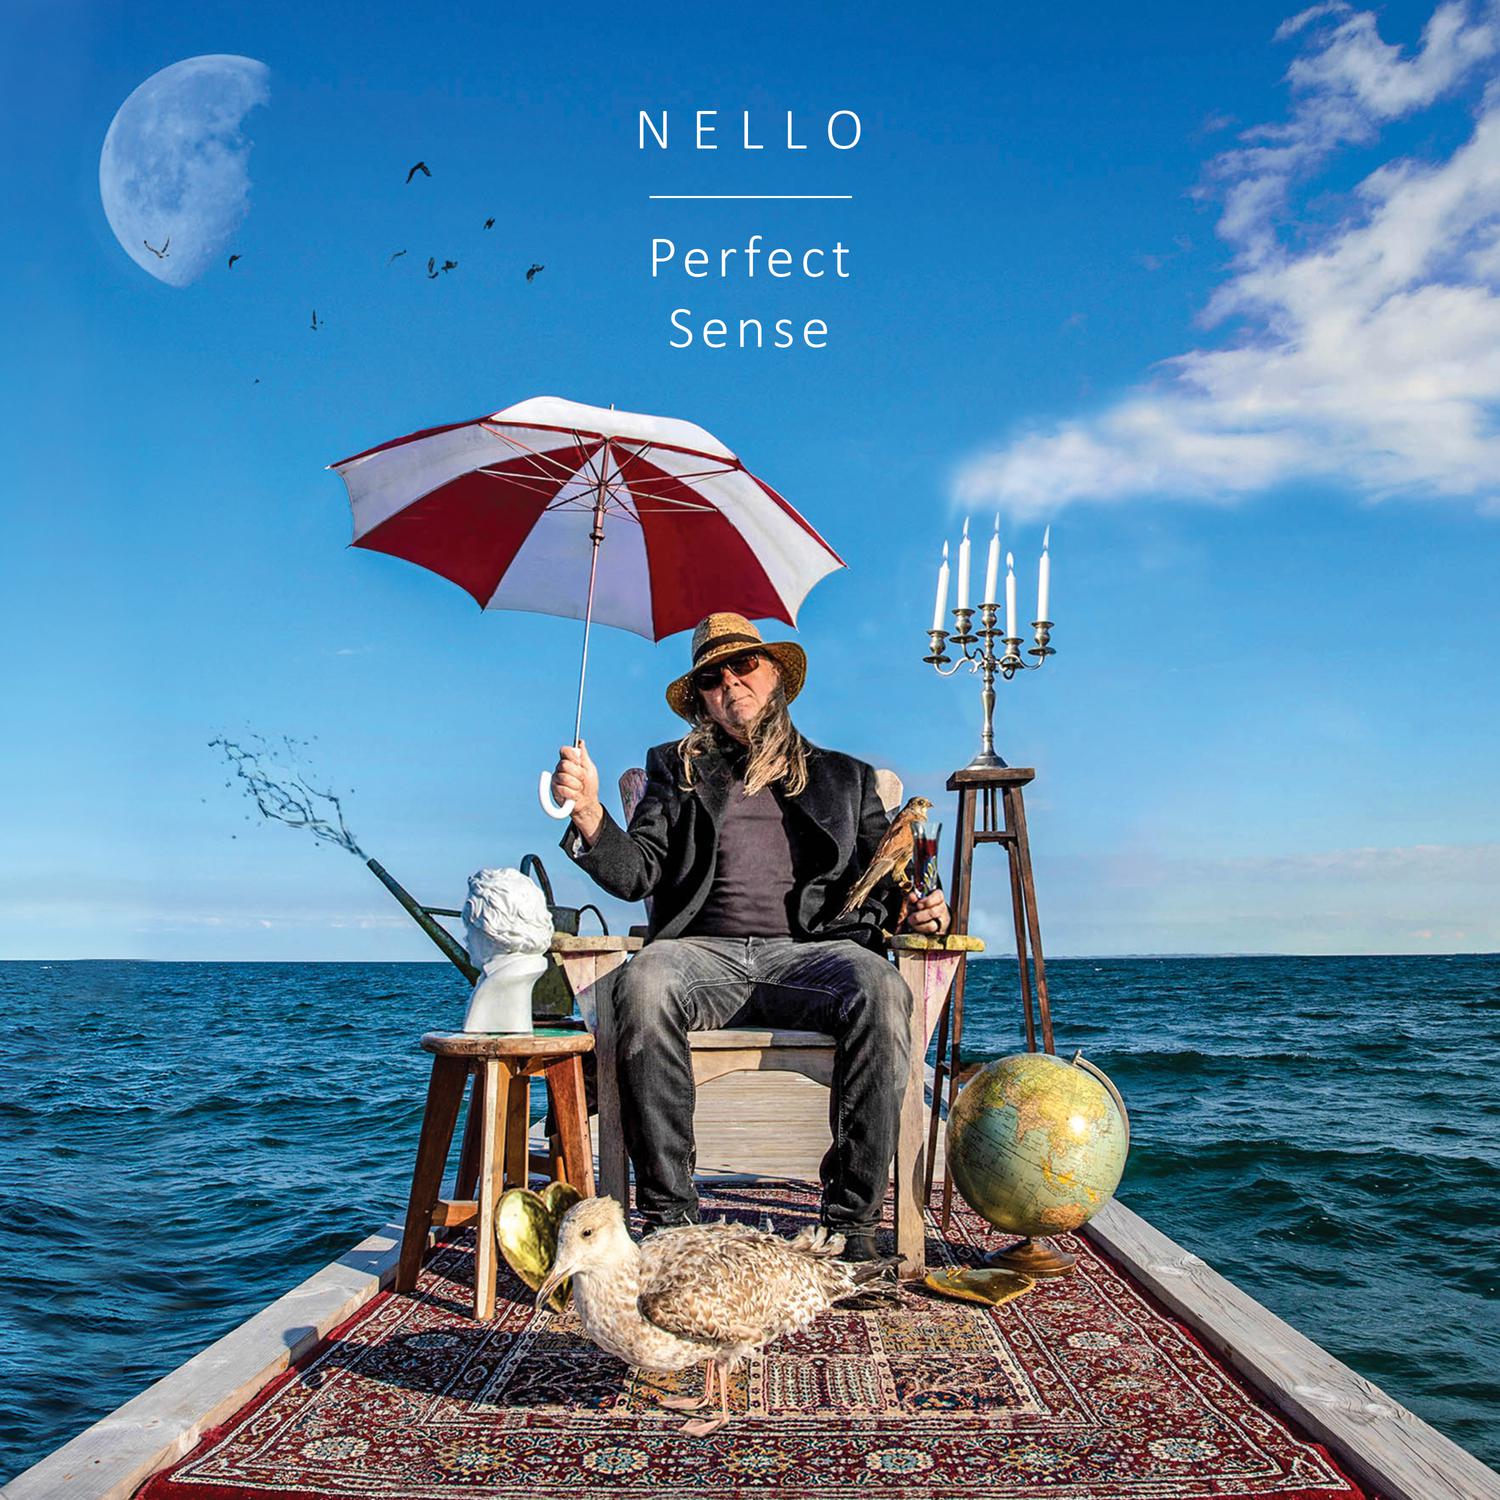 Nello - There is No Place